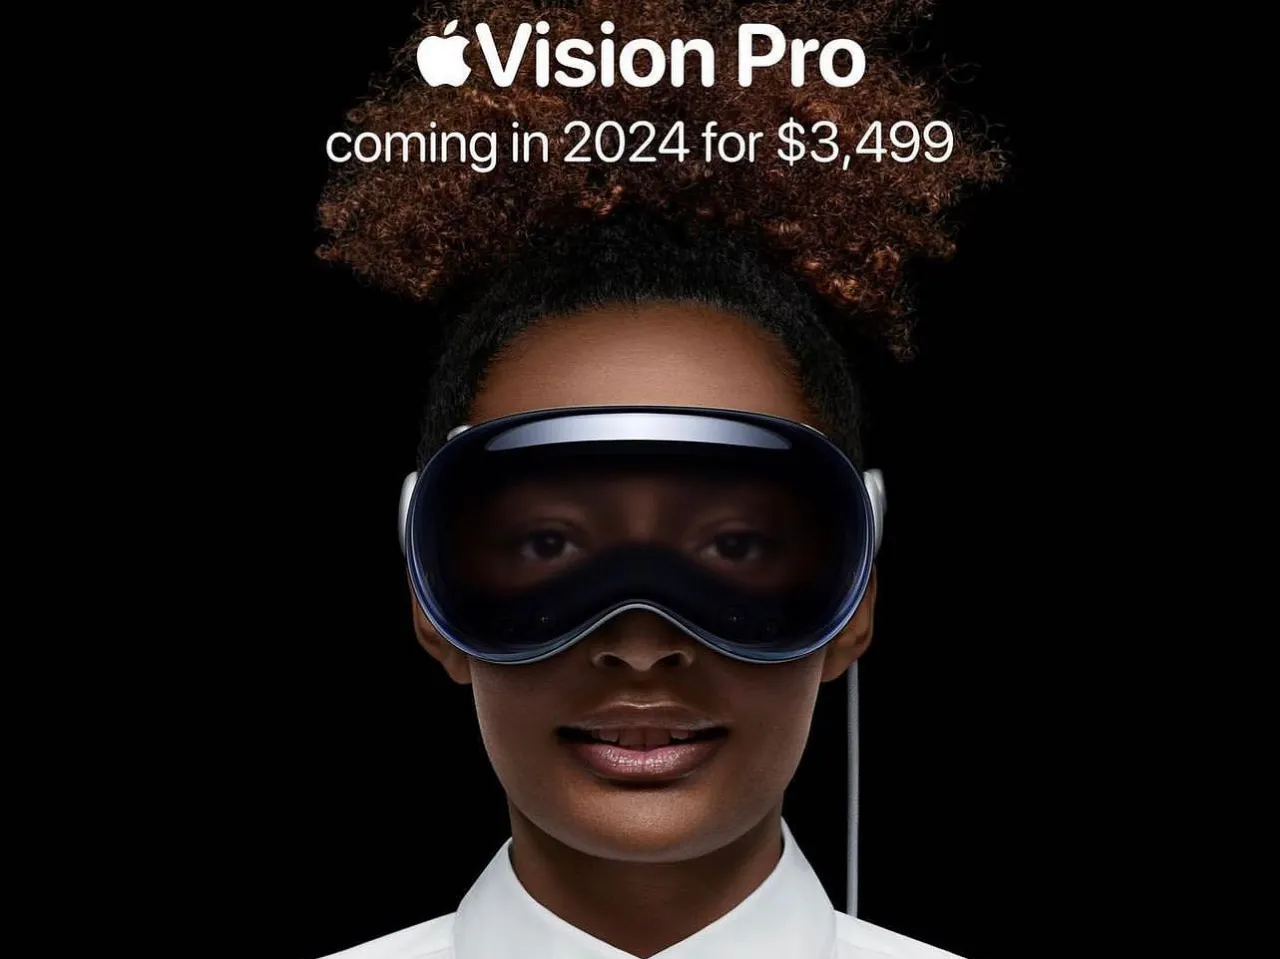 Apple Vision Pro price and release date